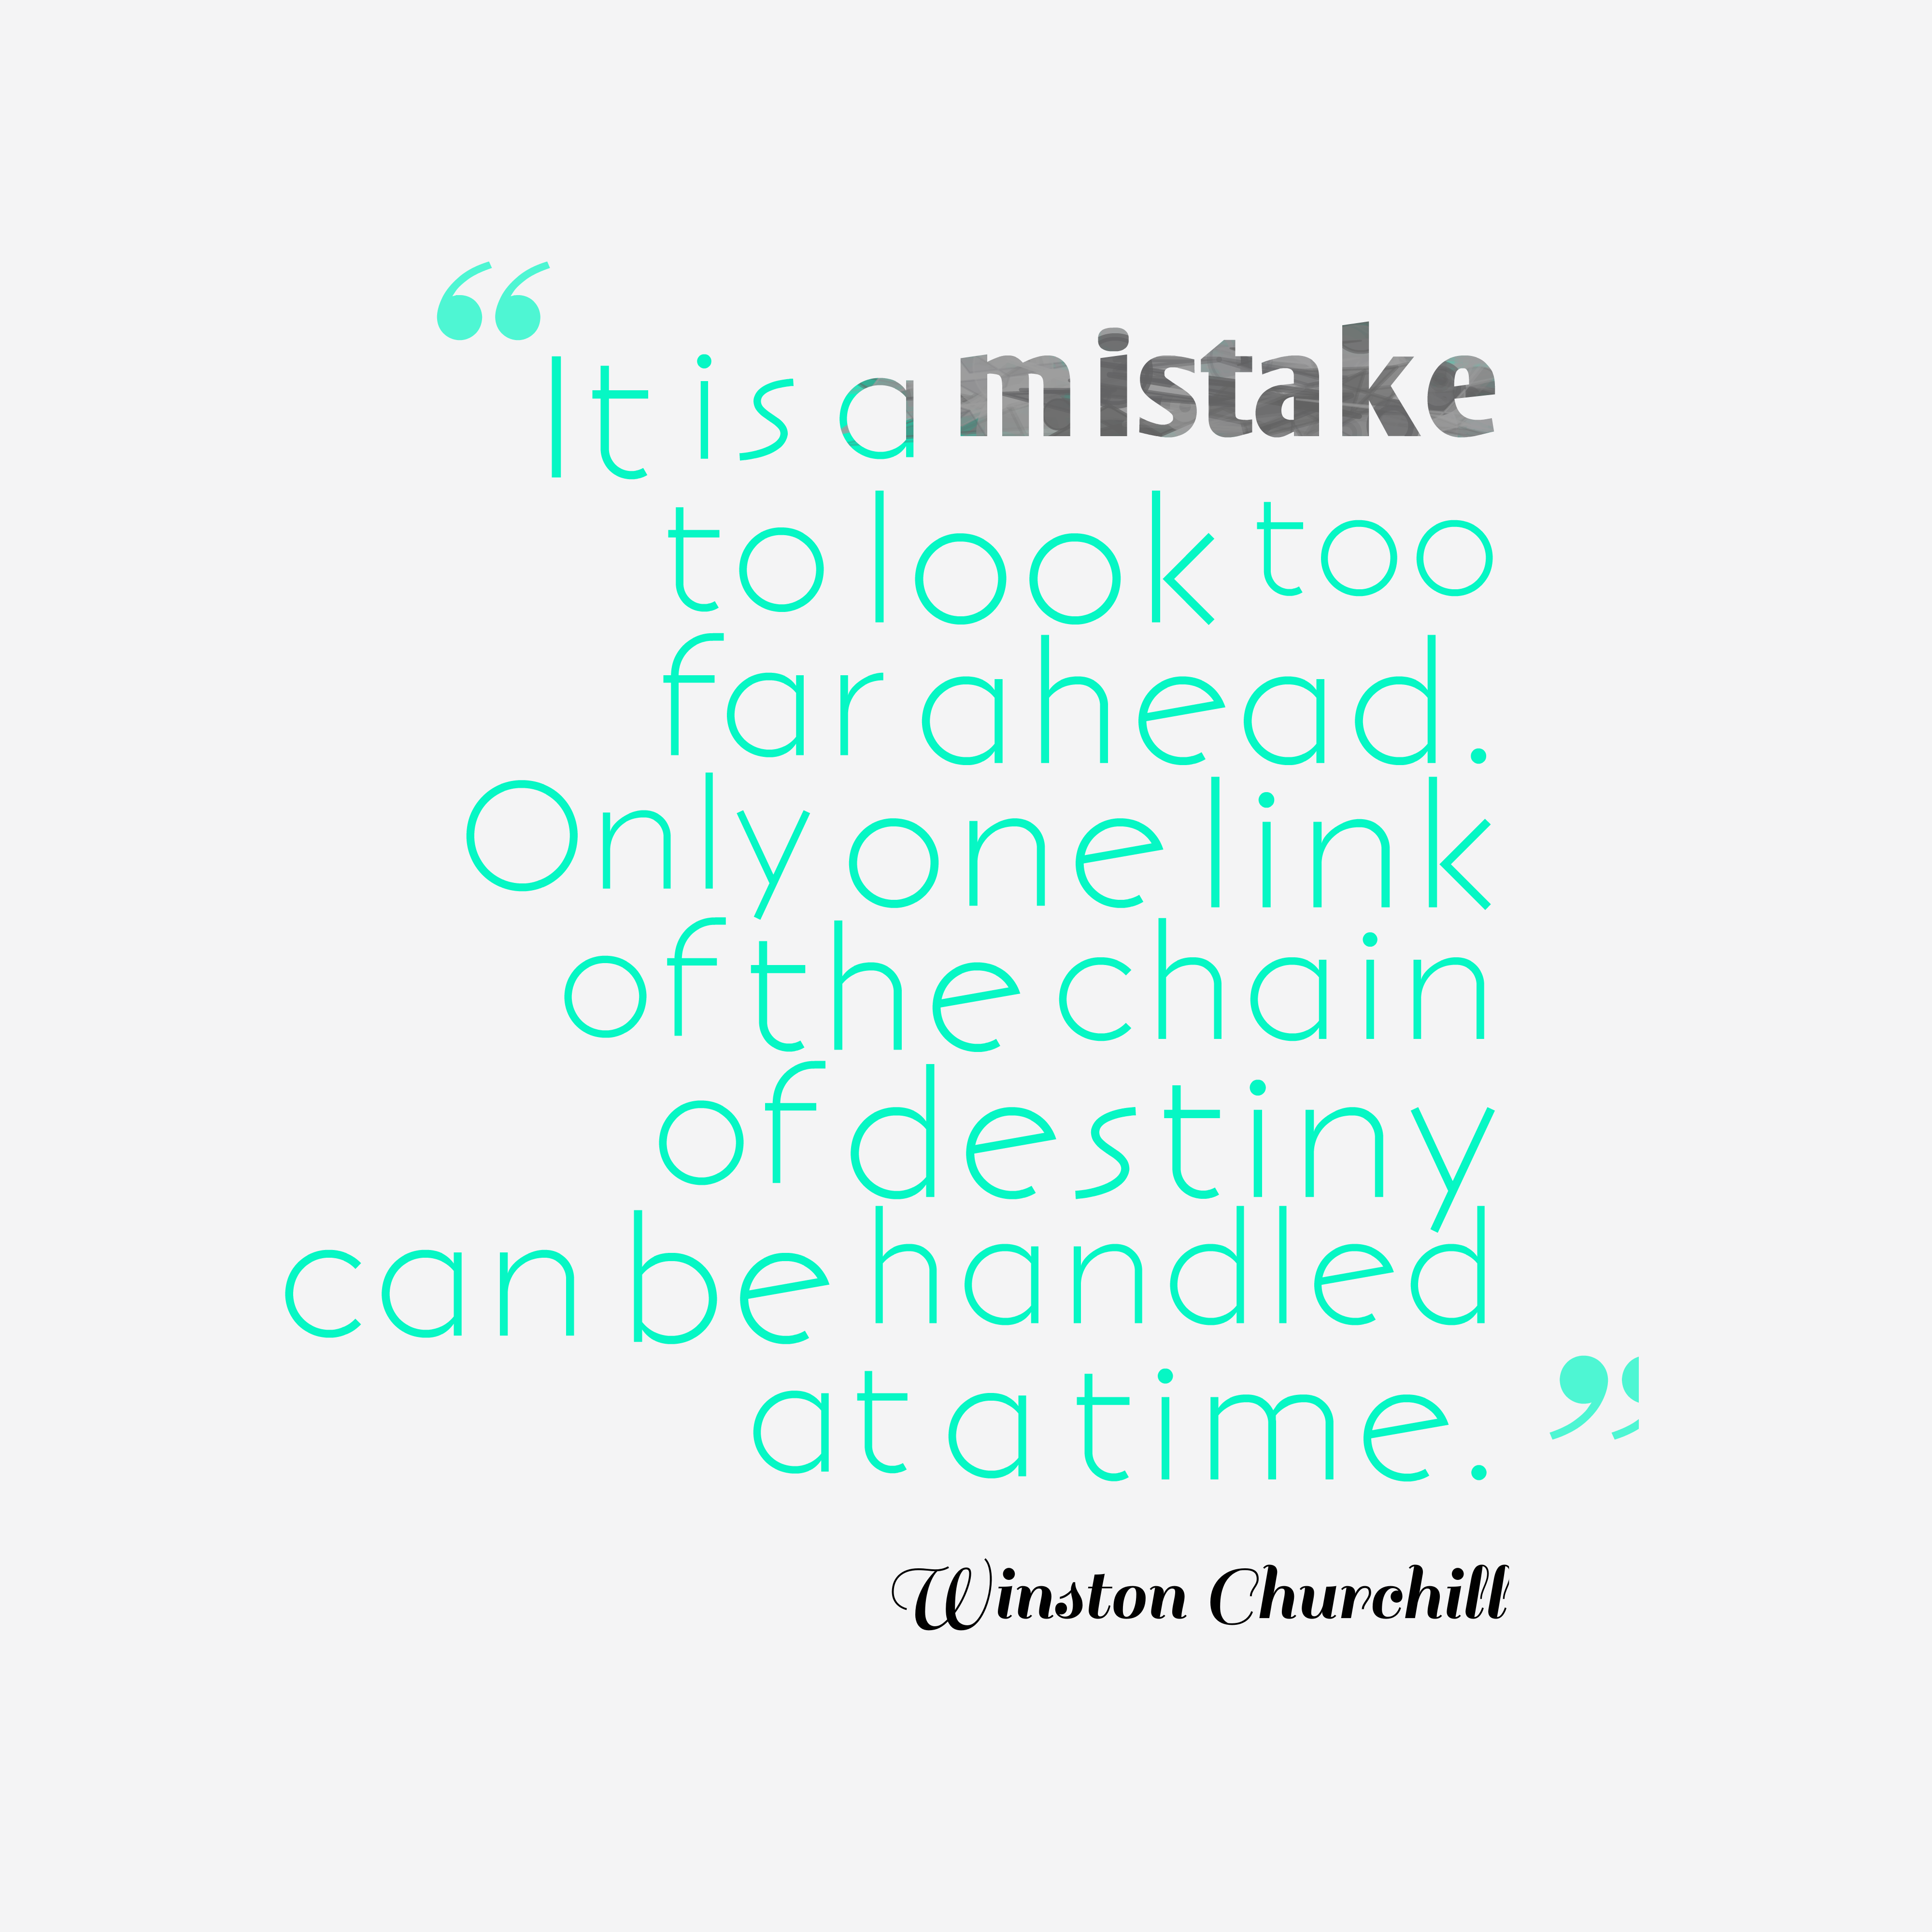 It is a mistake to look too far ahead. Only one link of the chain of destiny can be handled at a time. winston churchill